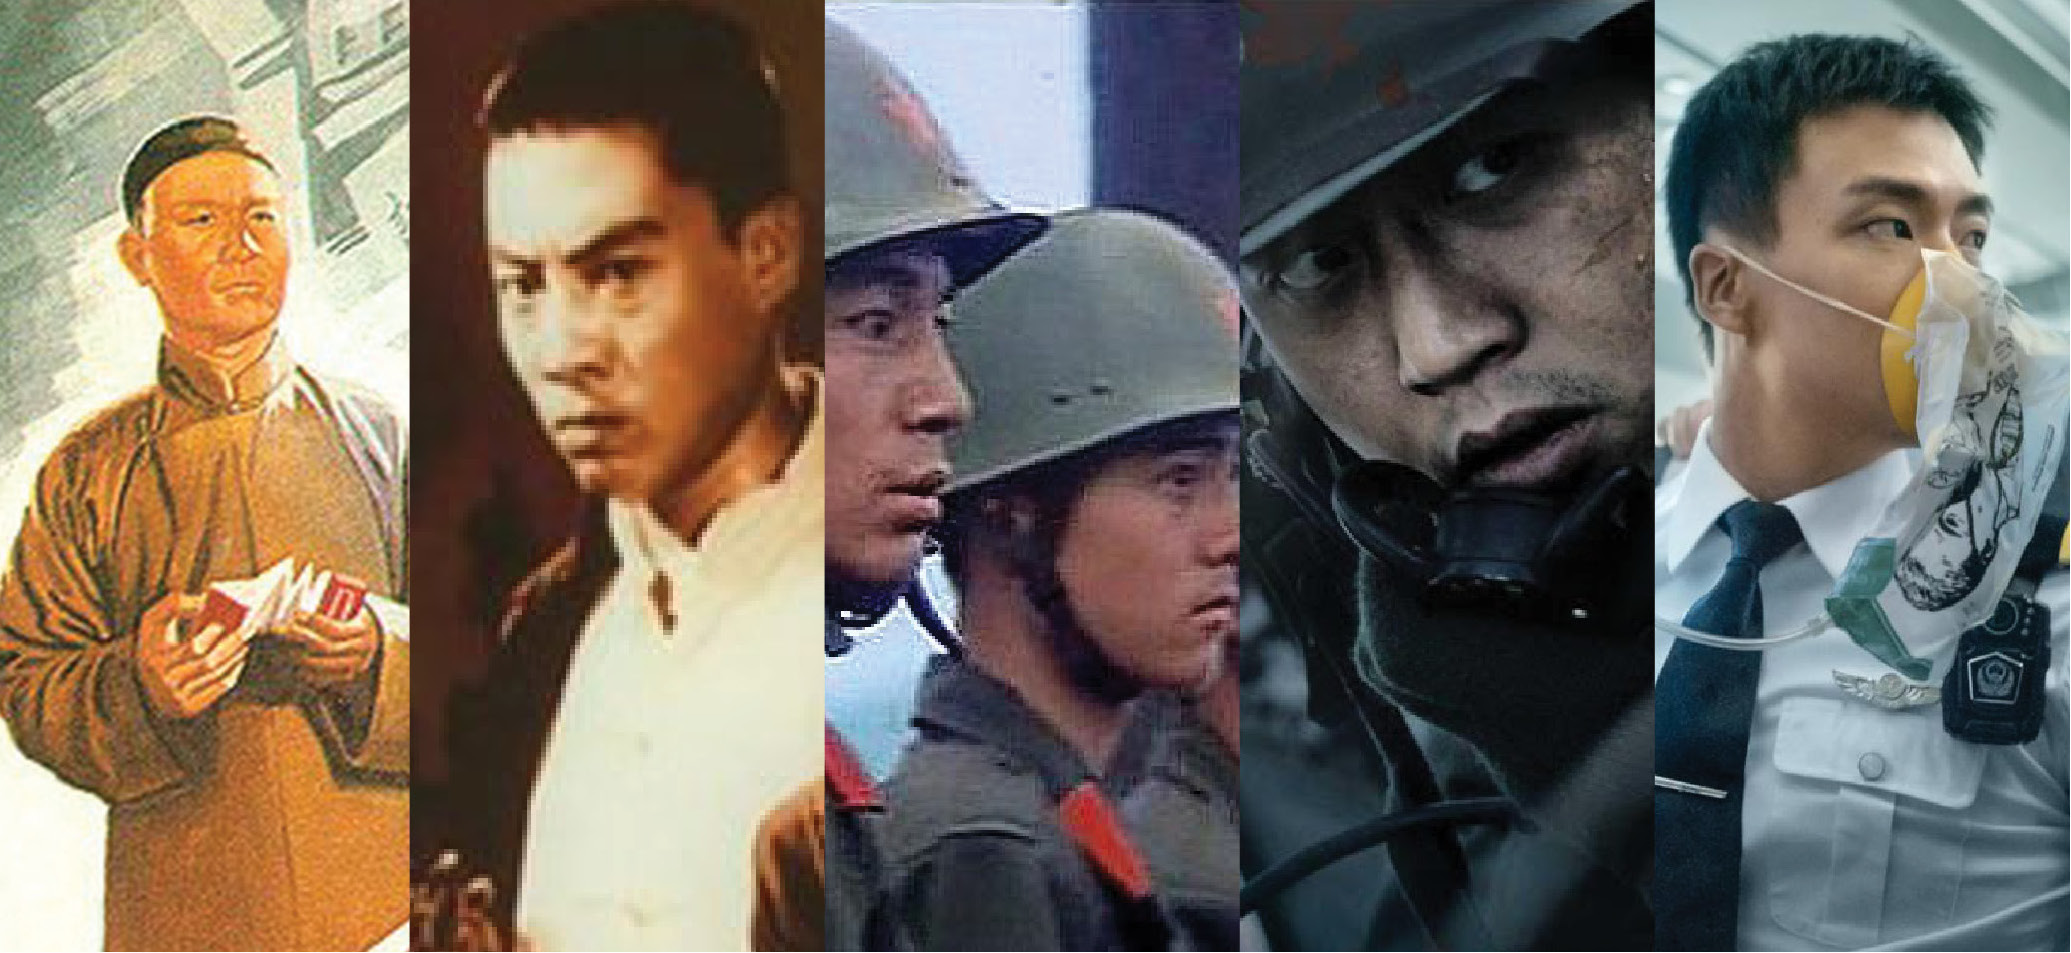 China National Day movies that aren't terrible